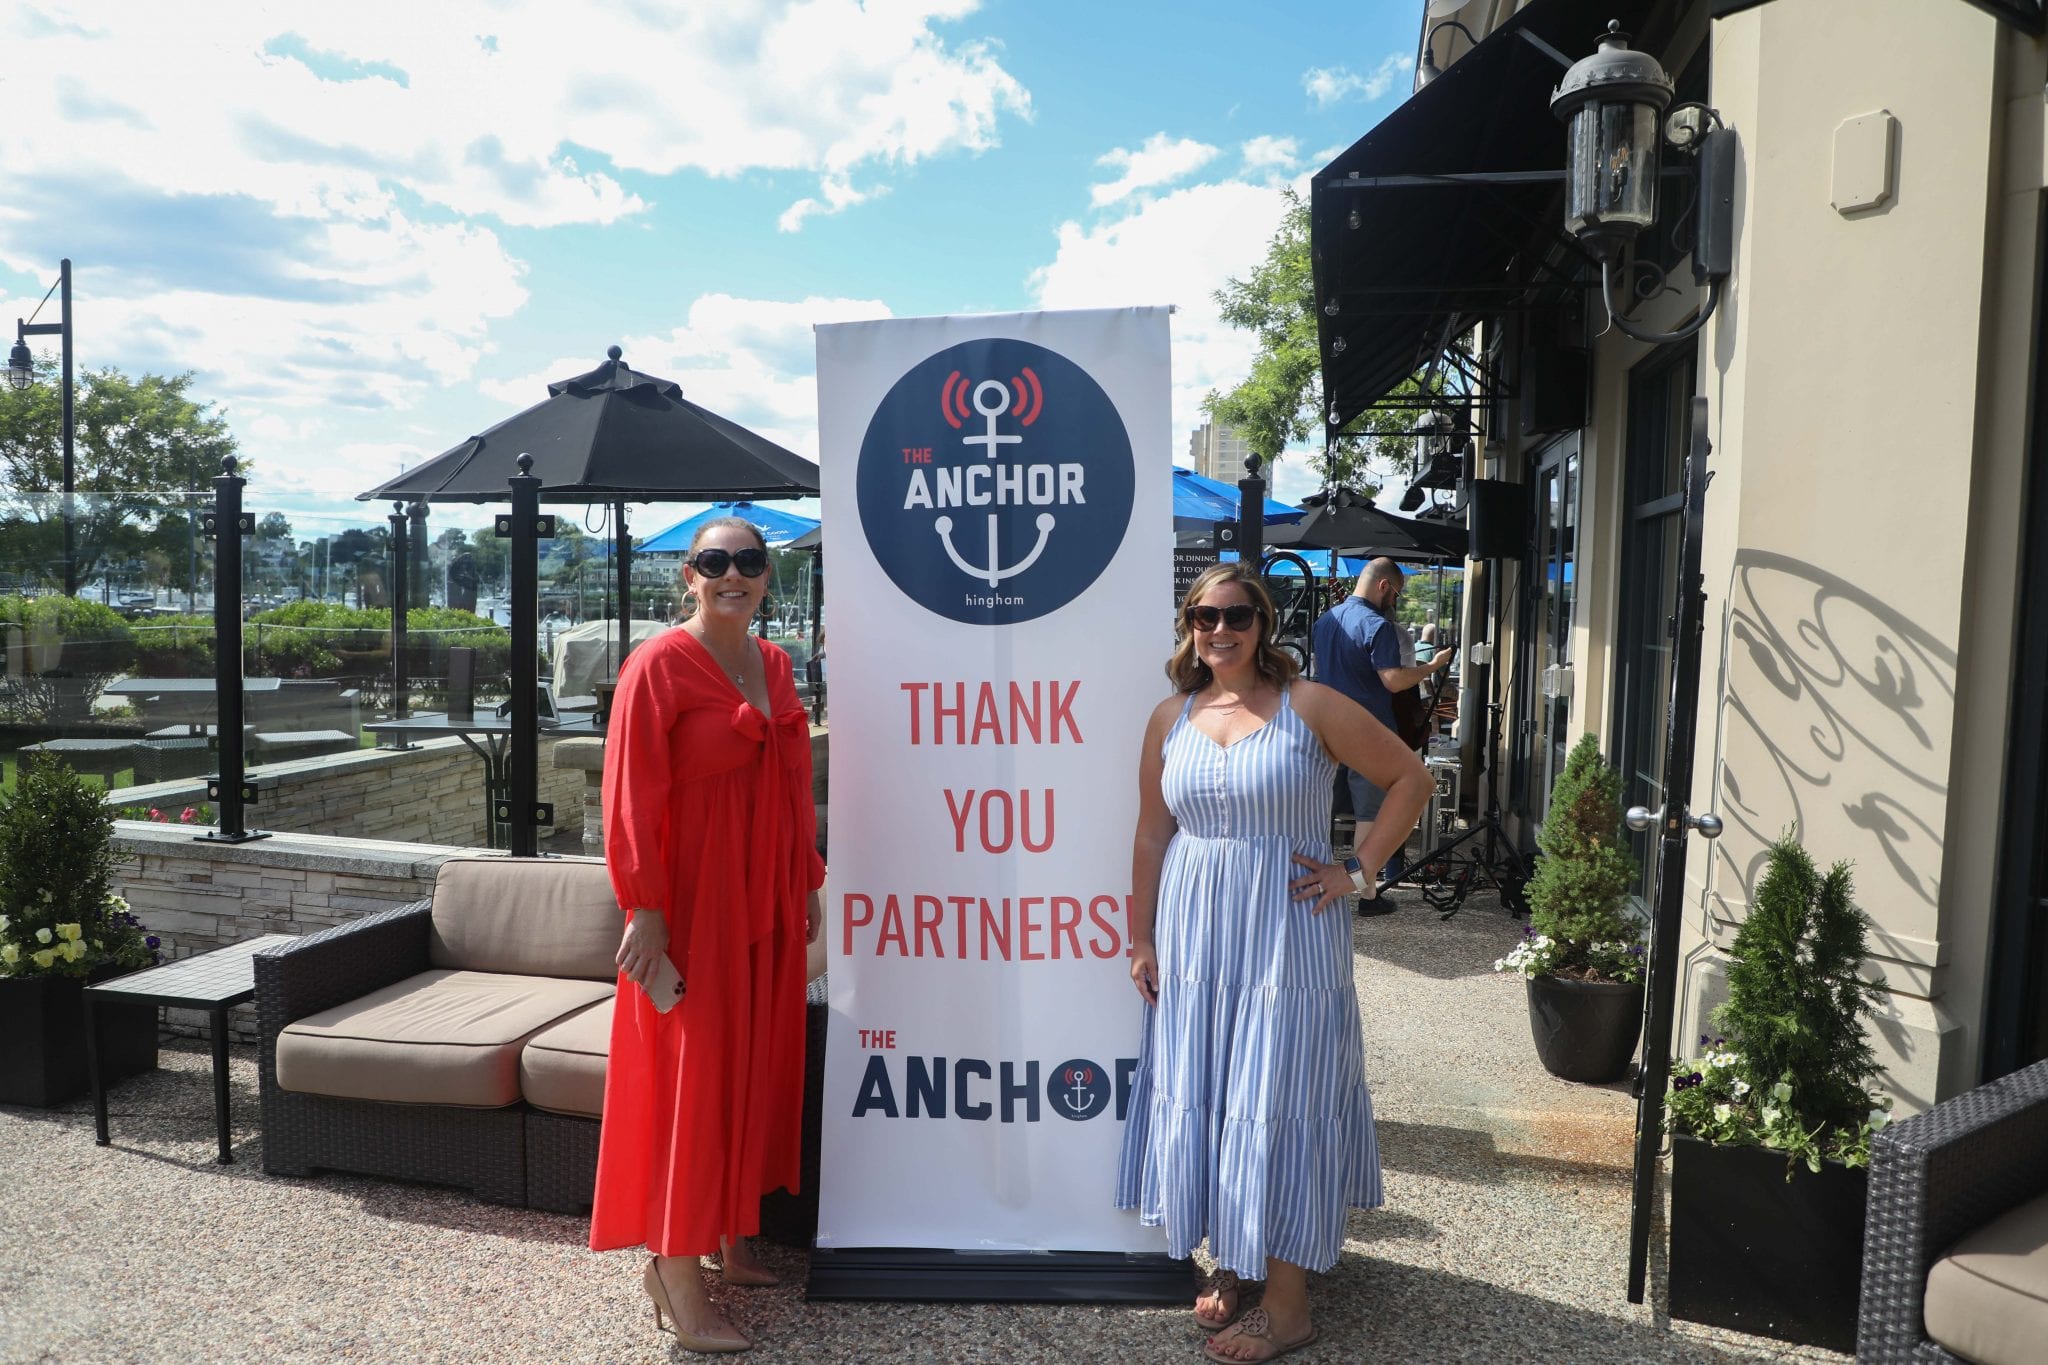 Laura Winters and Hilary Jenison, Co-Founders of The Hingham Anchor